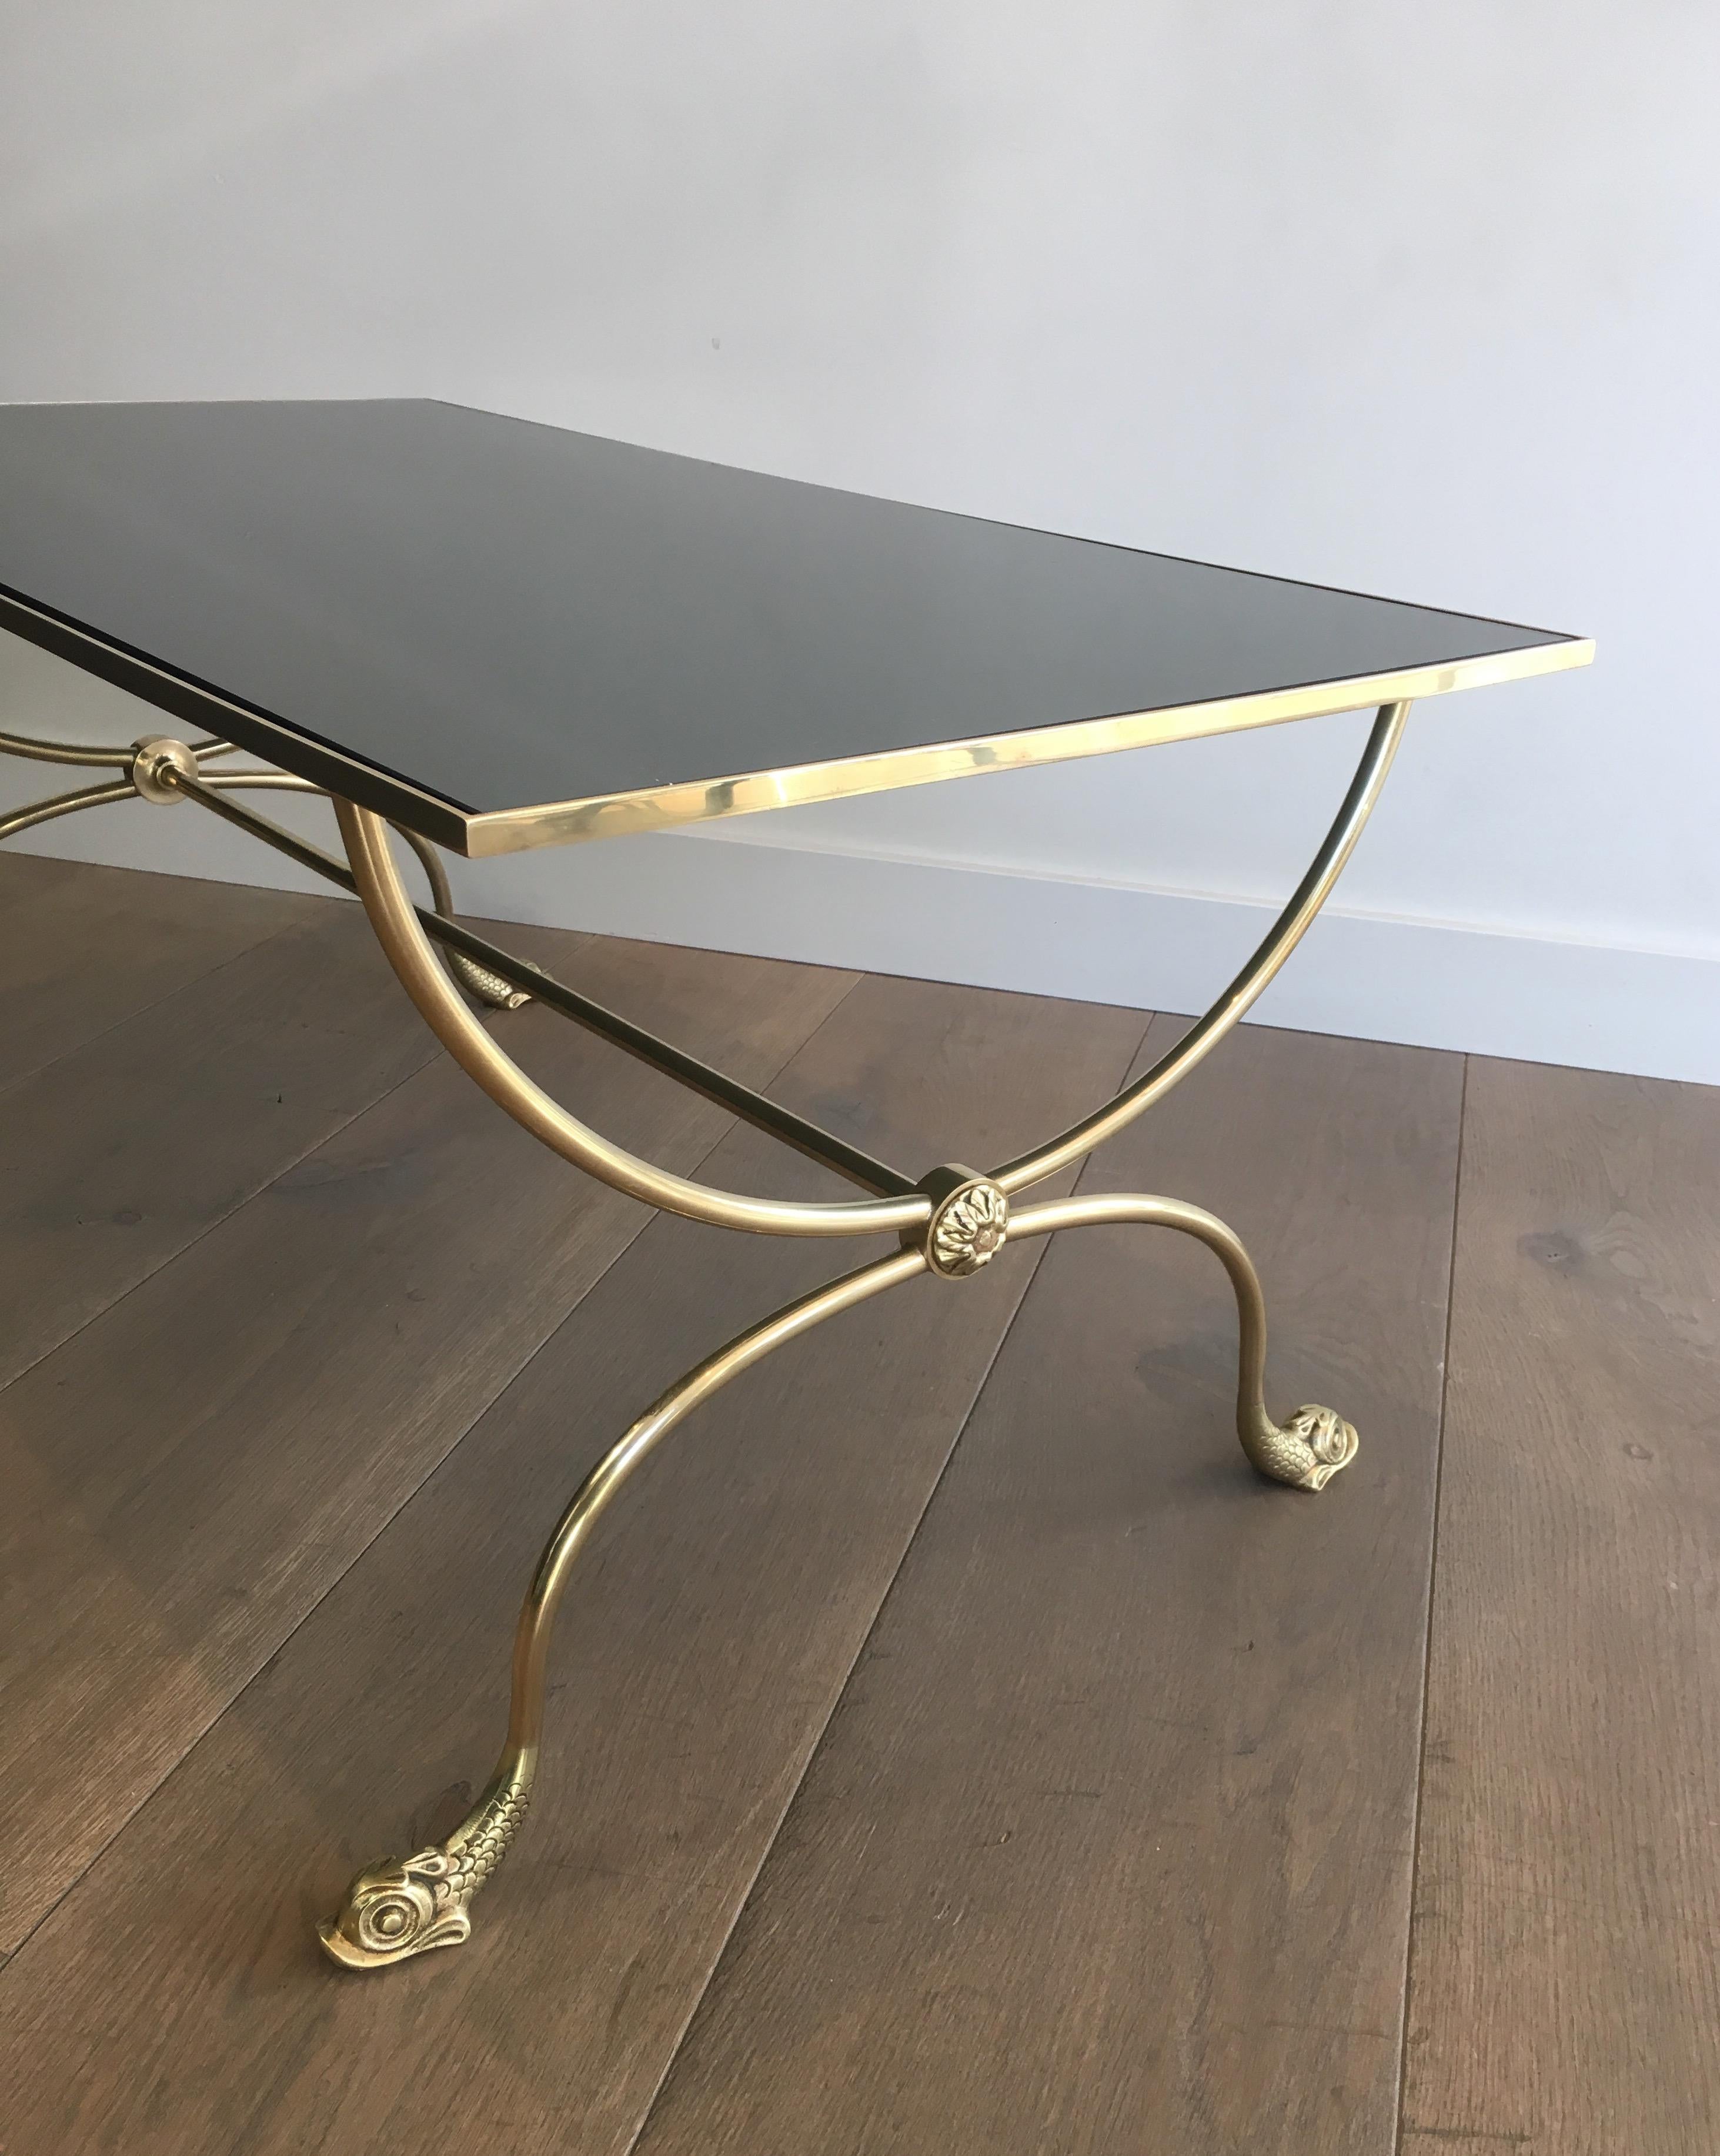 Mid-20th Century Neoclassical Style Brass Coffee Table with Dolphins Heads and Mirror Top For Sale